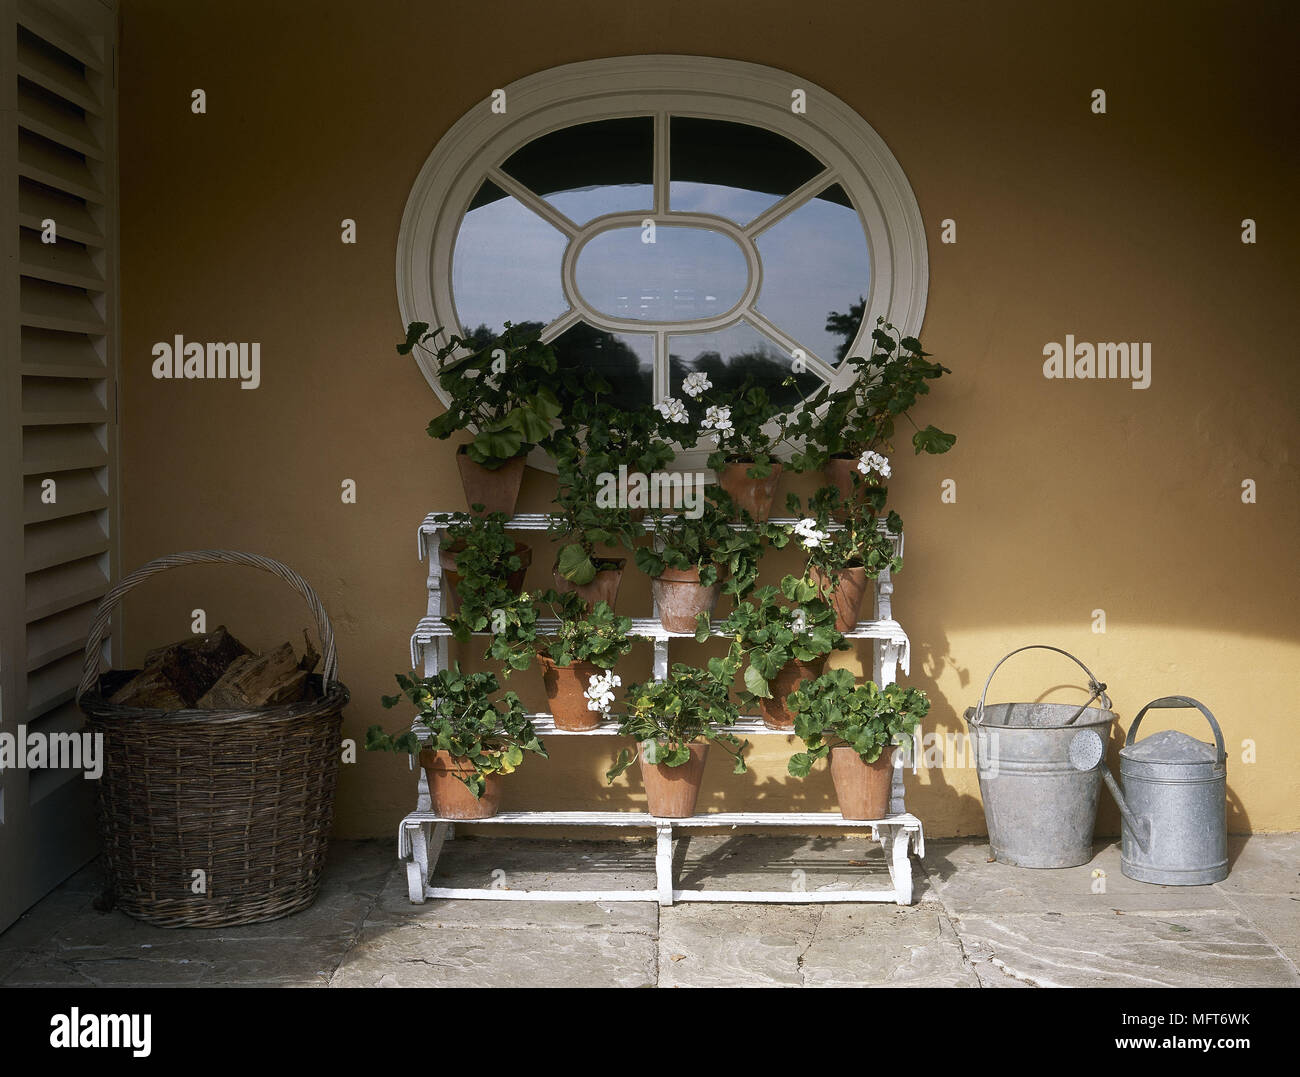 Paved patio area pot plant stand watering can  patios flowers pots Stock Photo